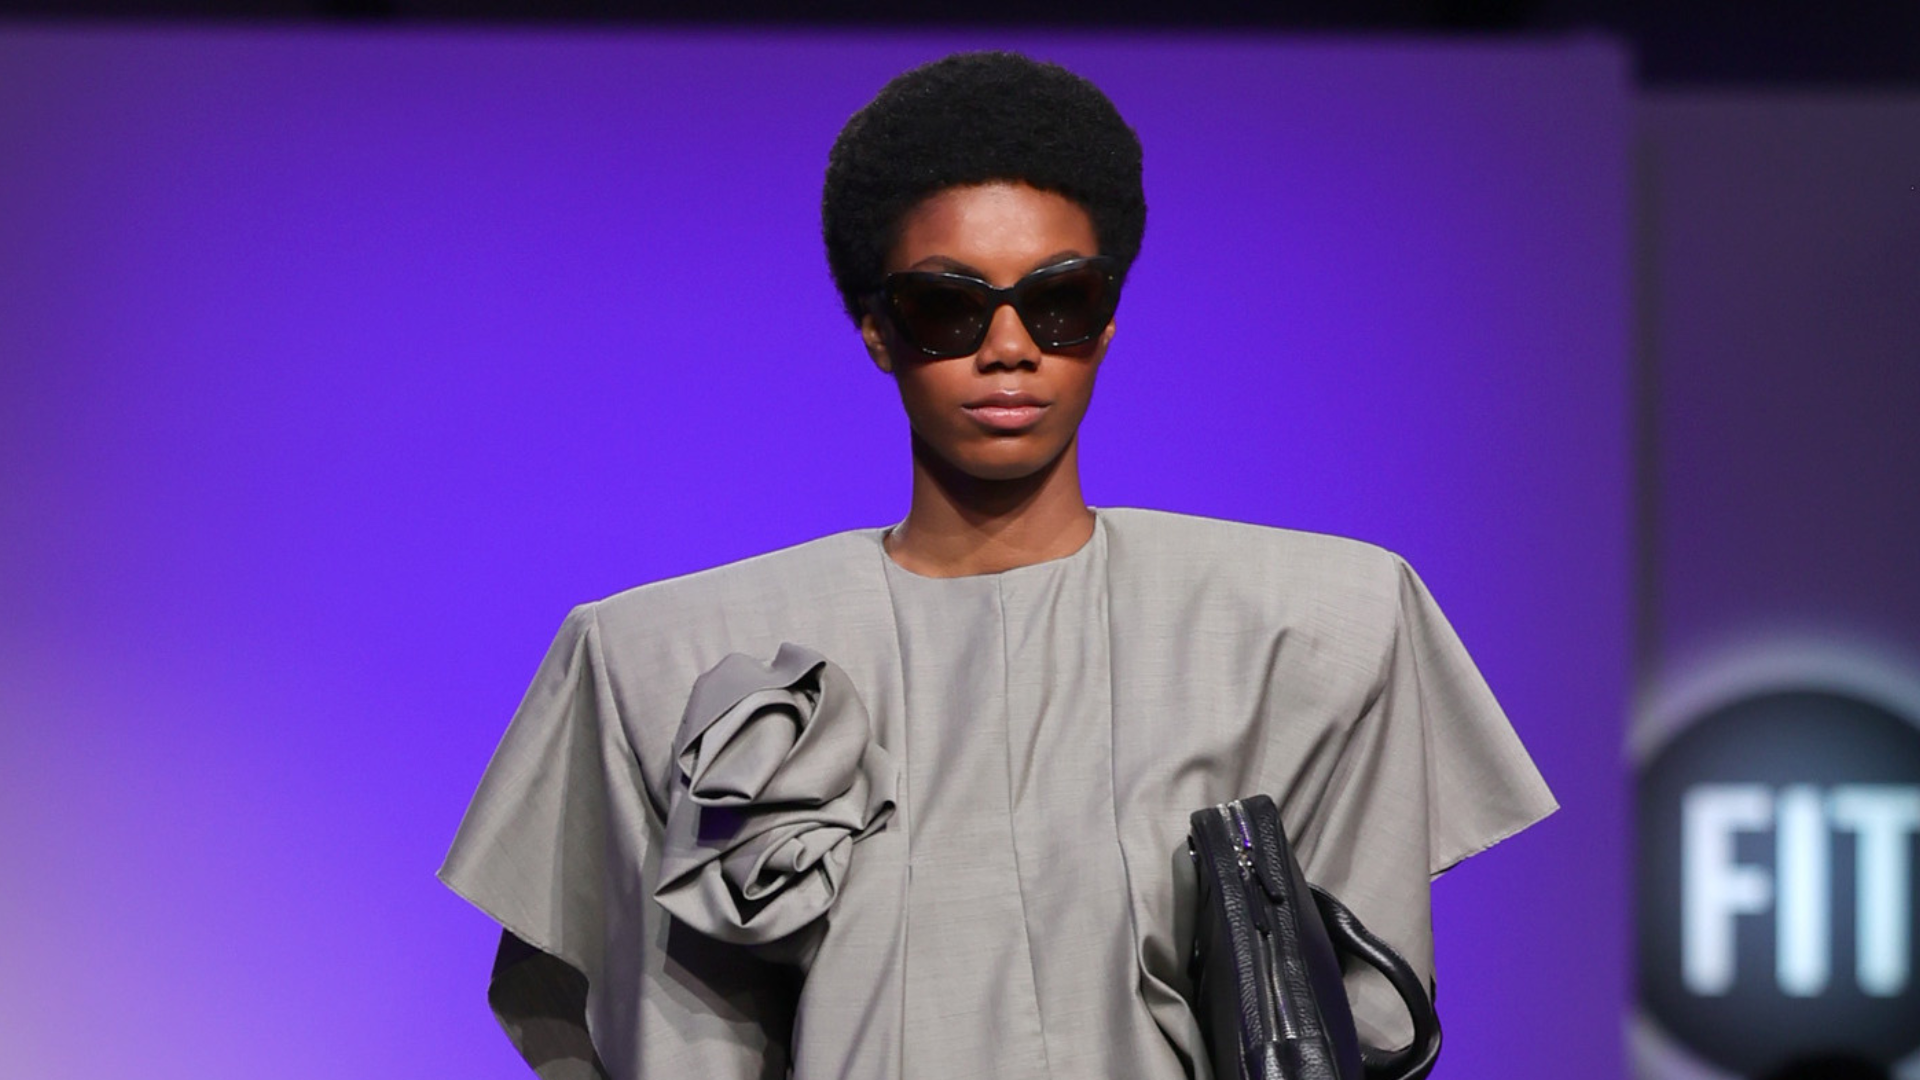 A Night With FIT’s Rising Crop Of Student Designers